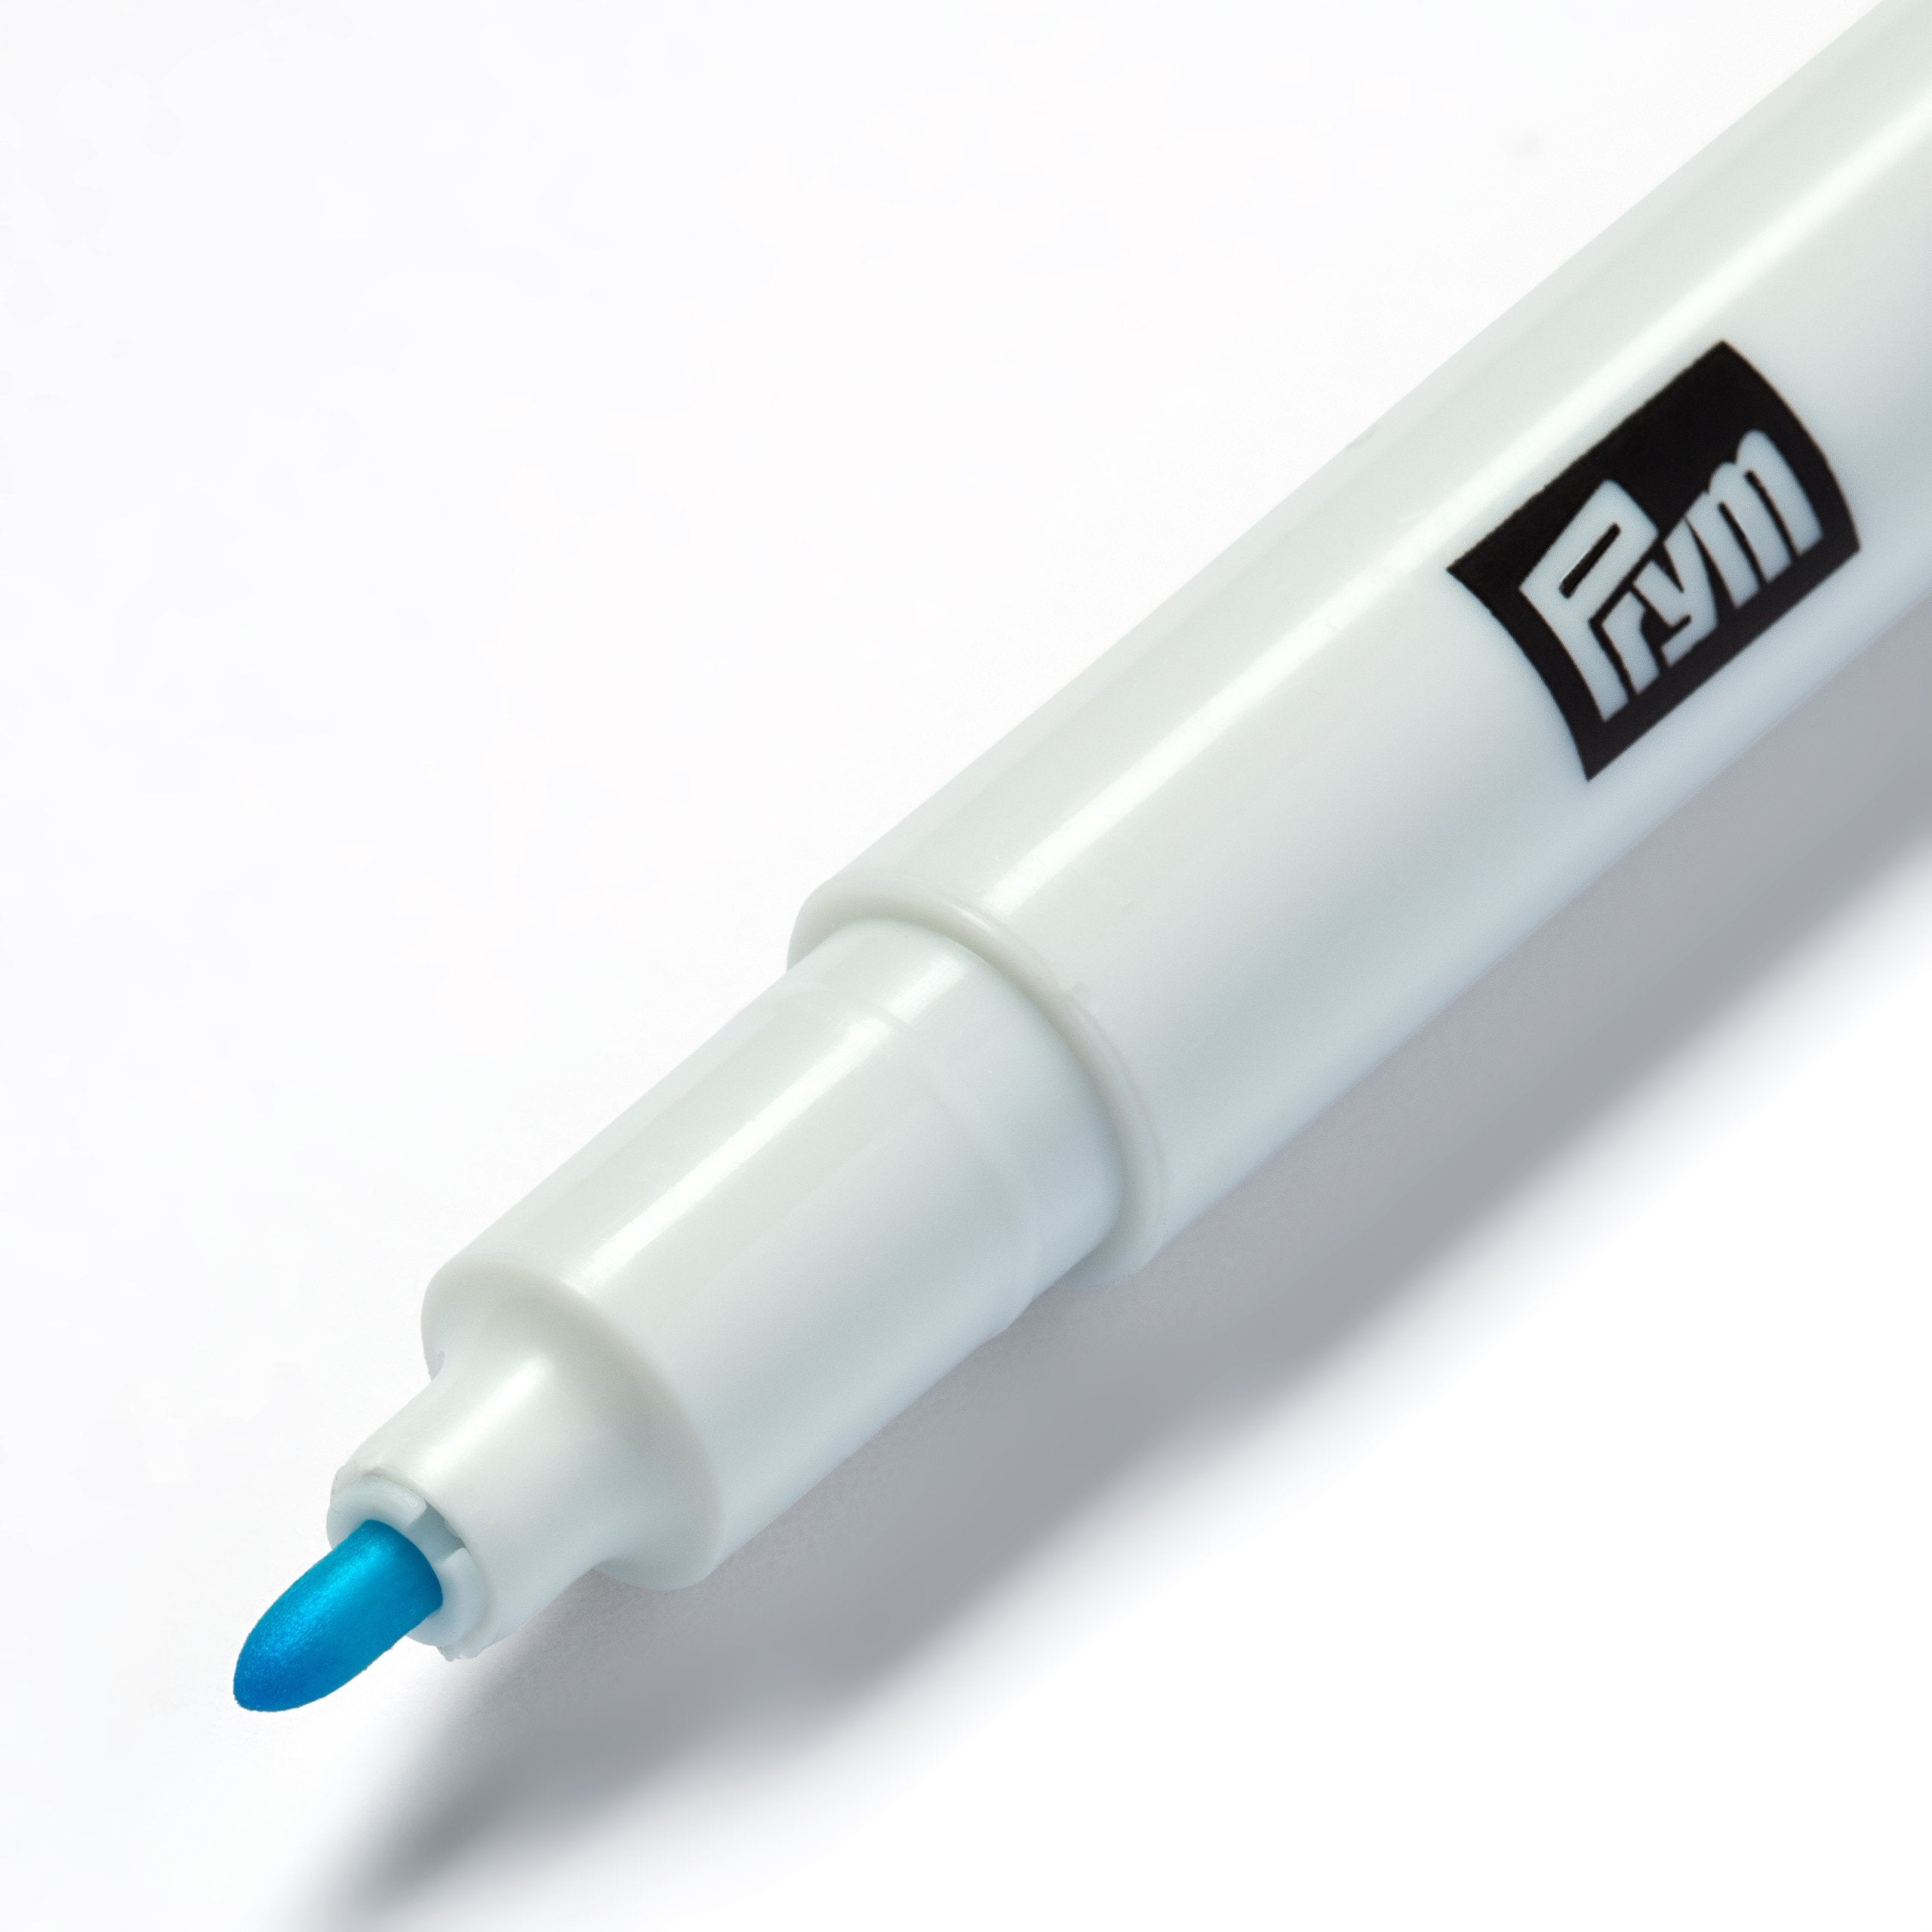 Prym Water Erasable Pen | 611807 from Jaycotts Sewing Supplies